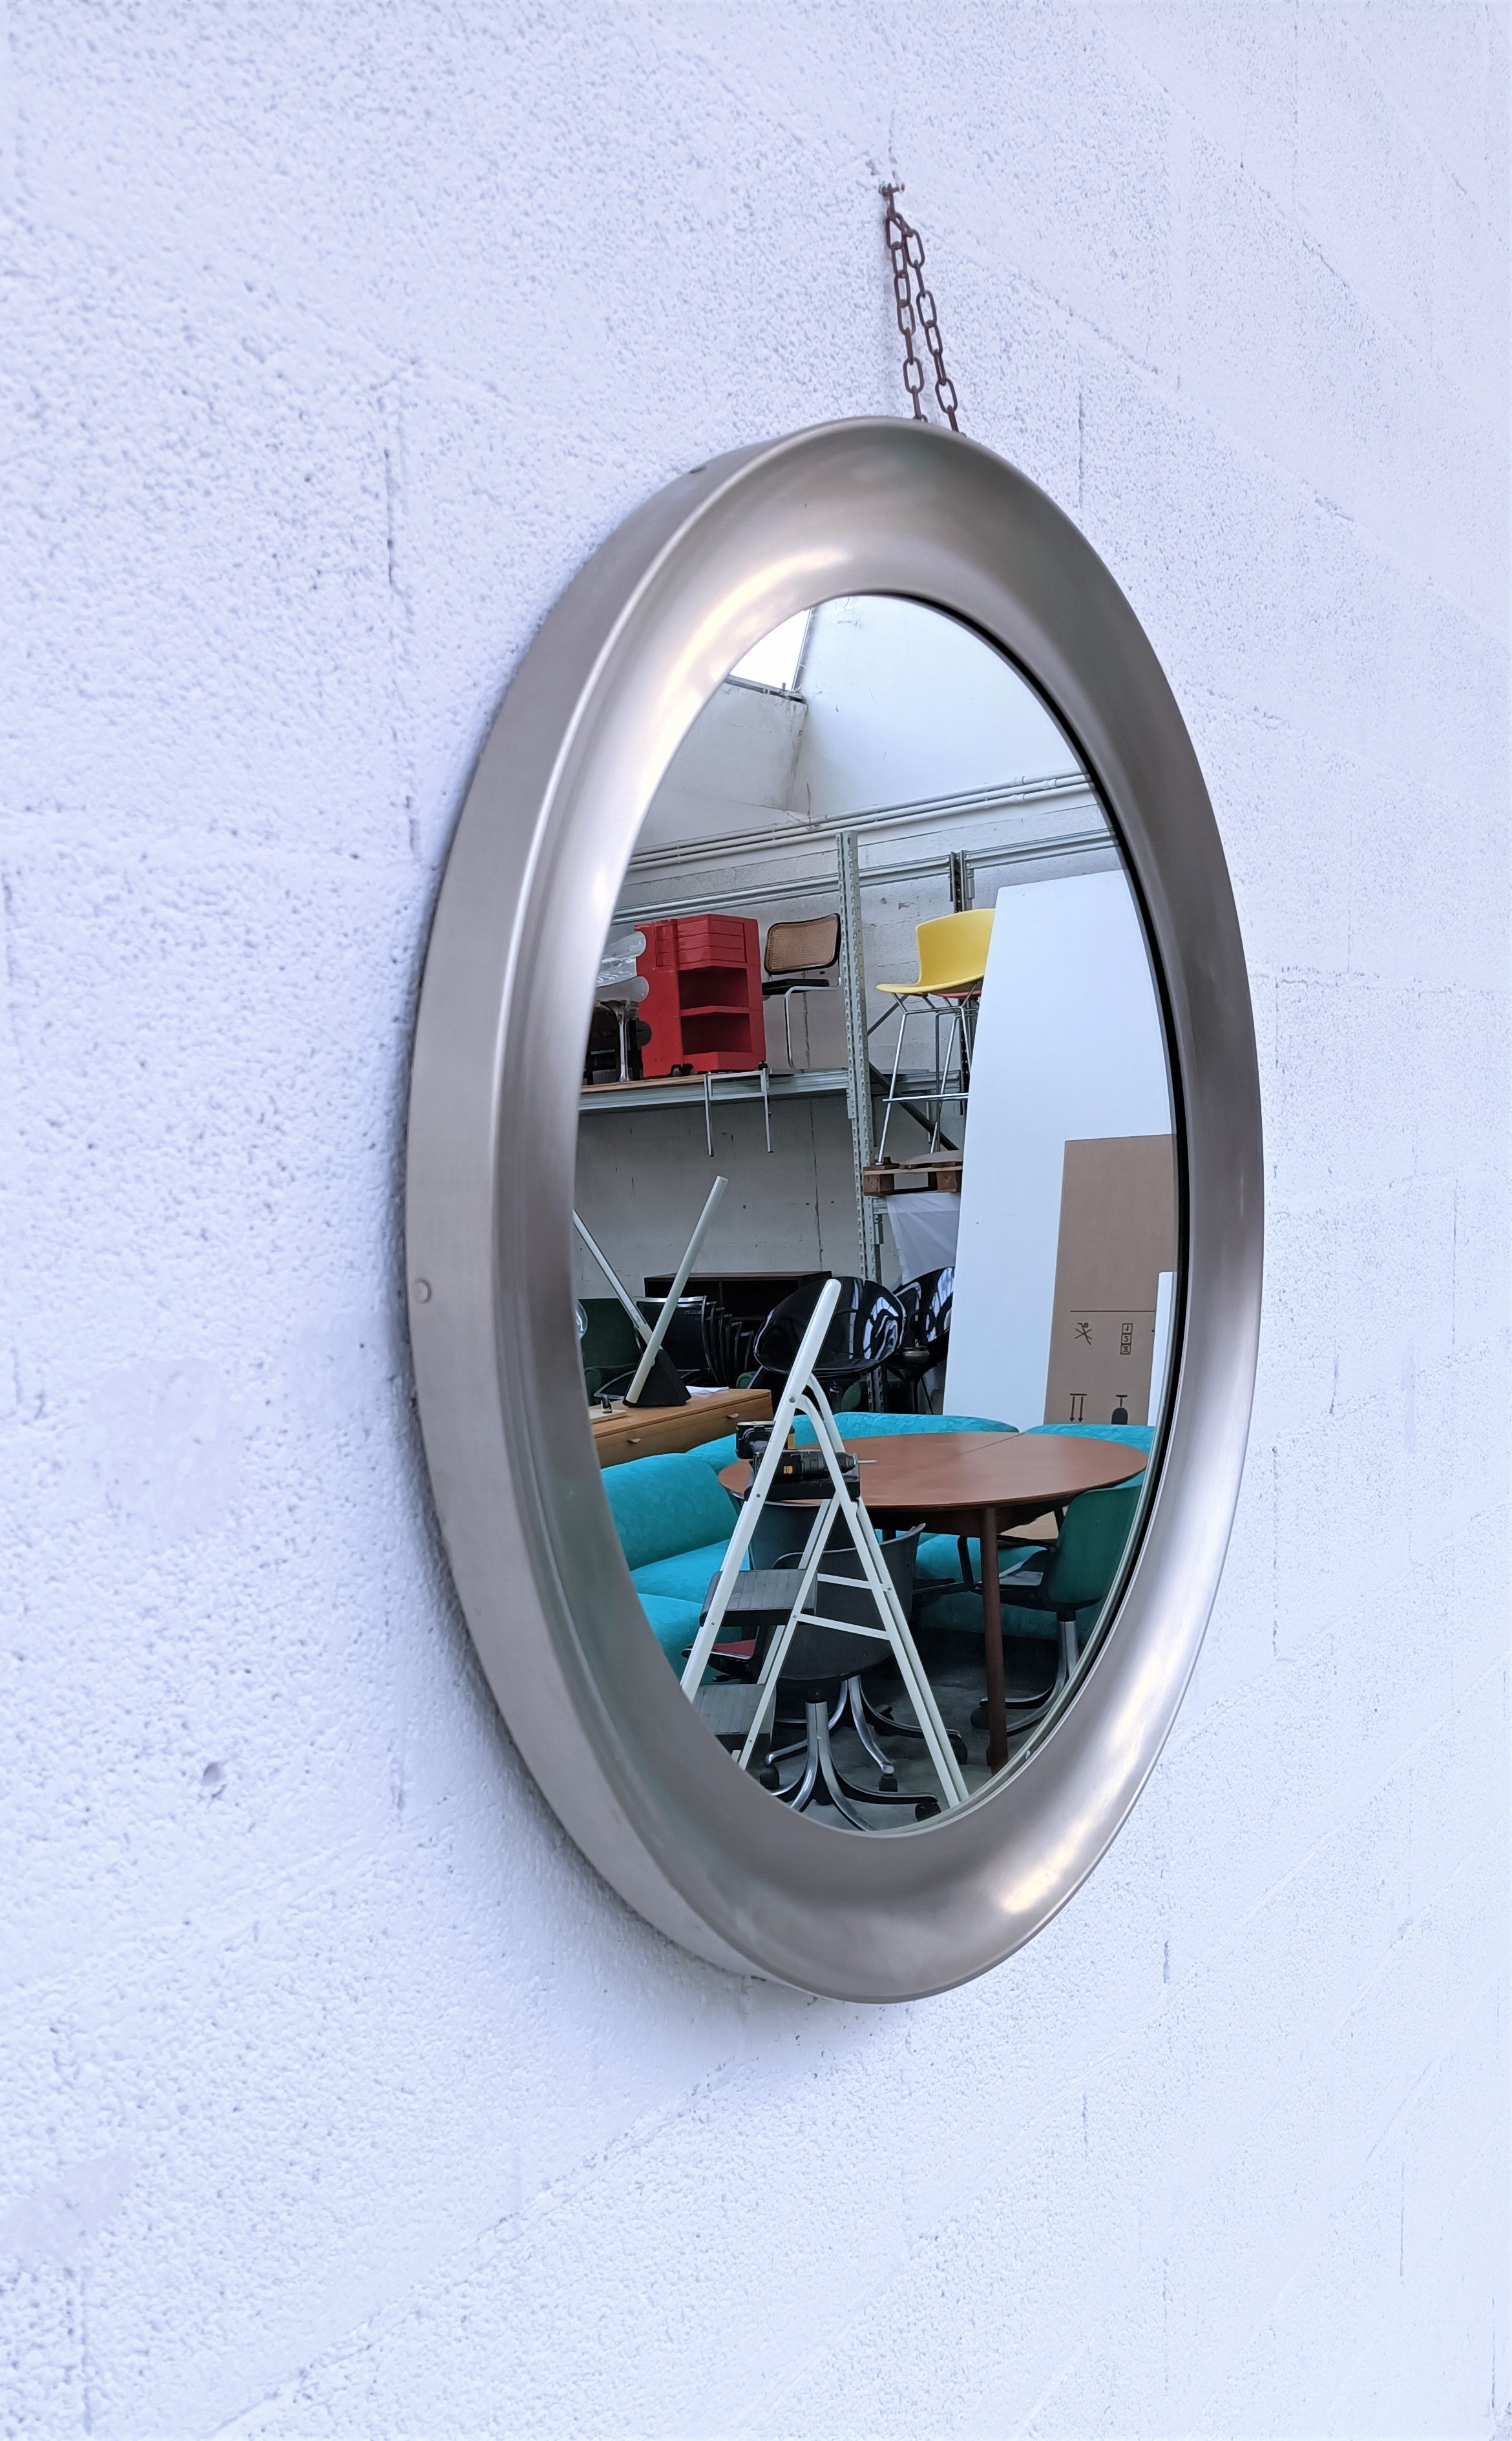 Stunning round heavy wall mirror designed by Sergio Mazza and manufactured by Artemide in 1960s.
Minimalist Italian design.
The frame is made of nickel-plated brass, the back is in black plastic.